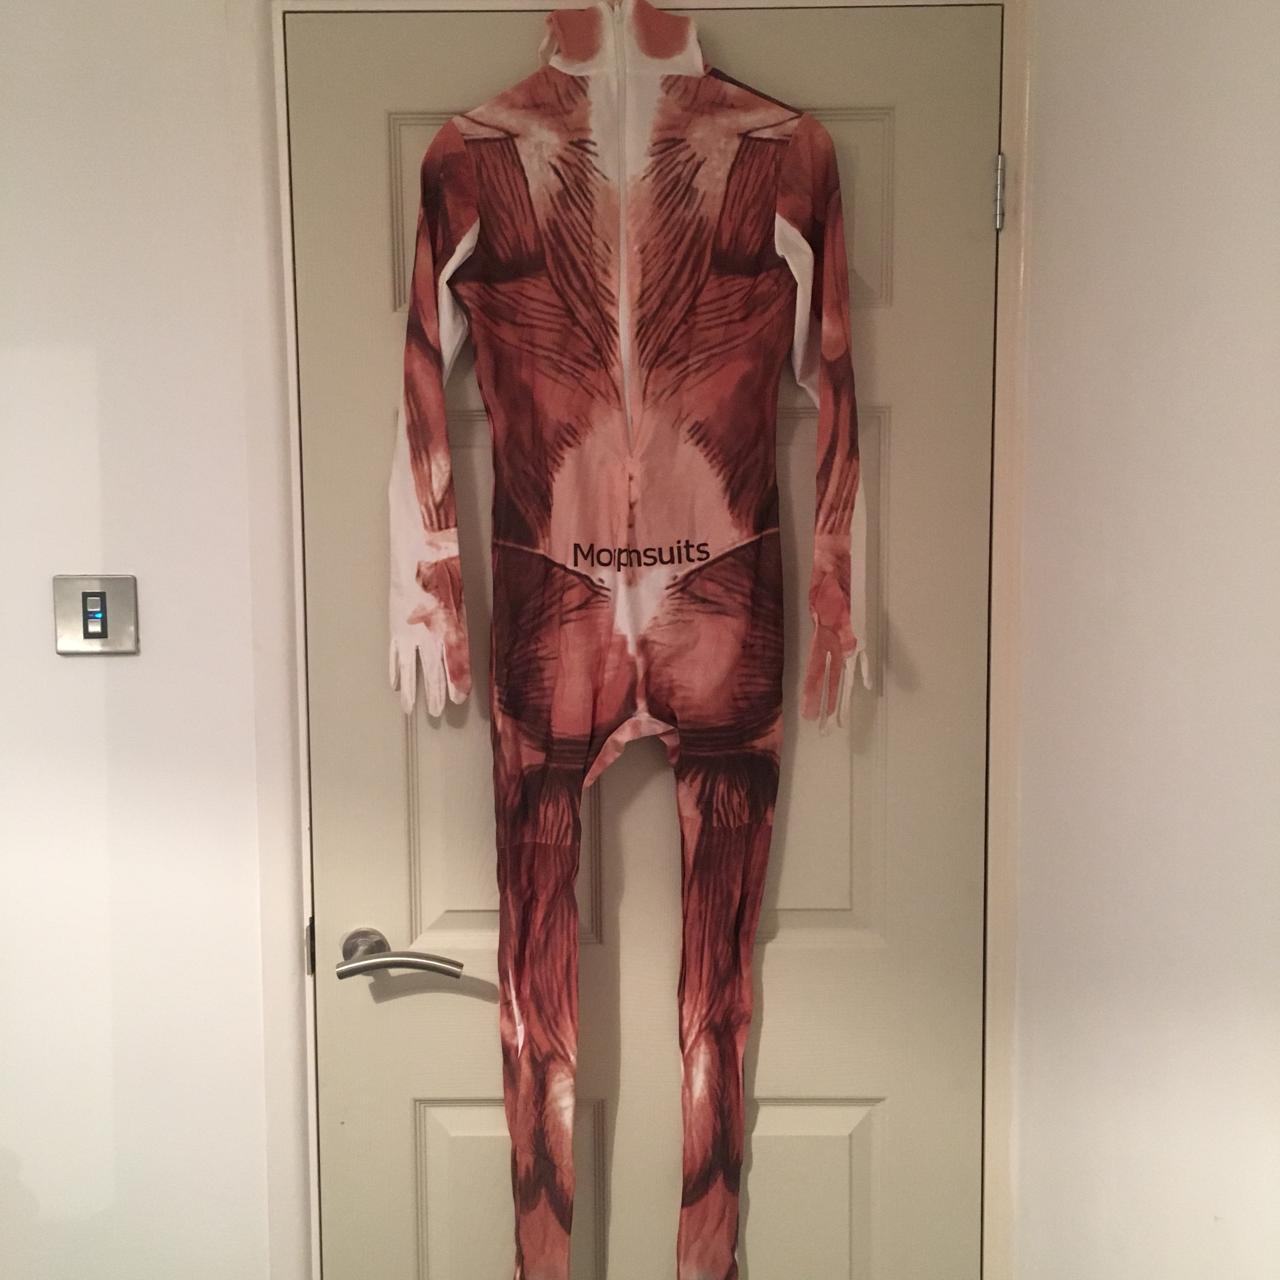 Muscle morph suit fancy dress , Only worn once, good